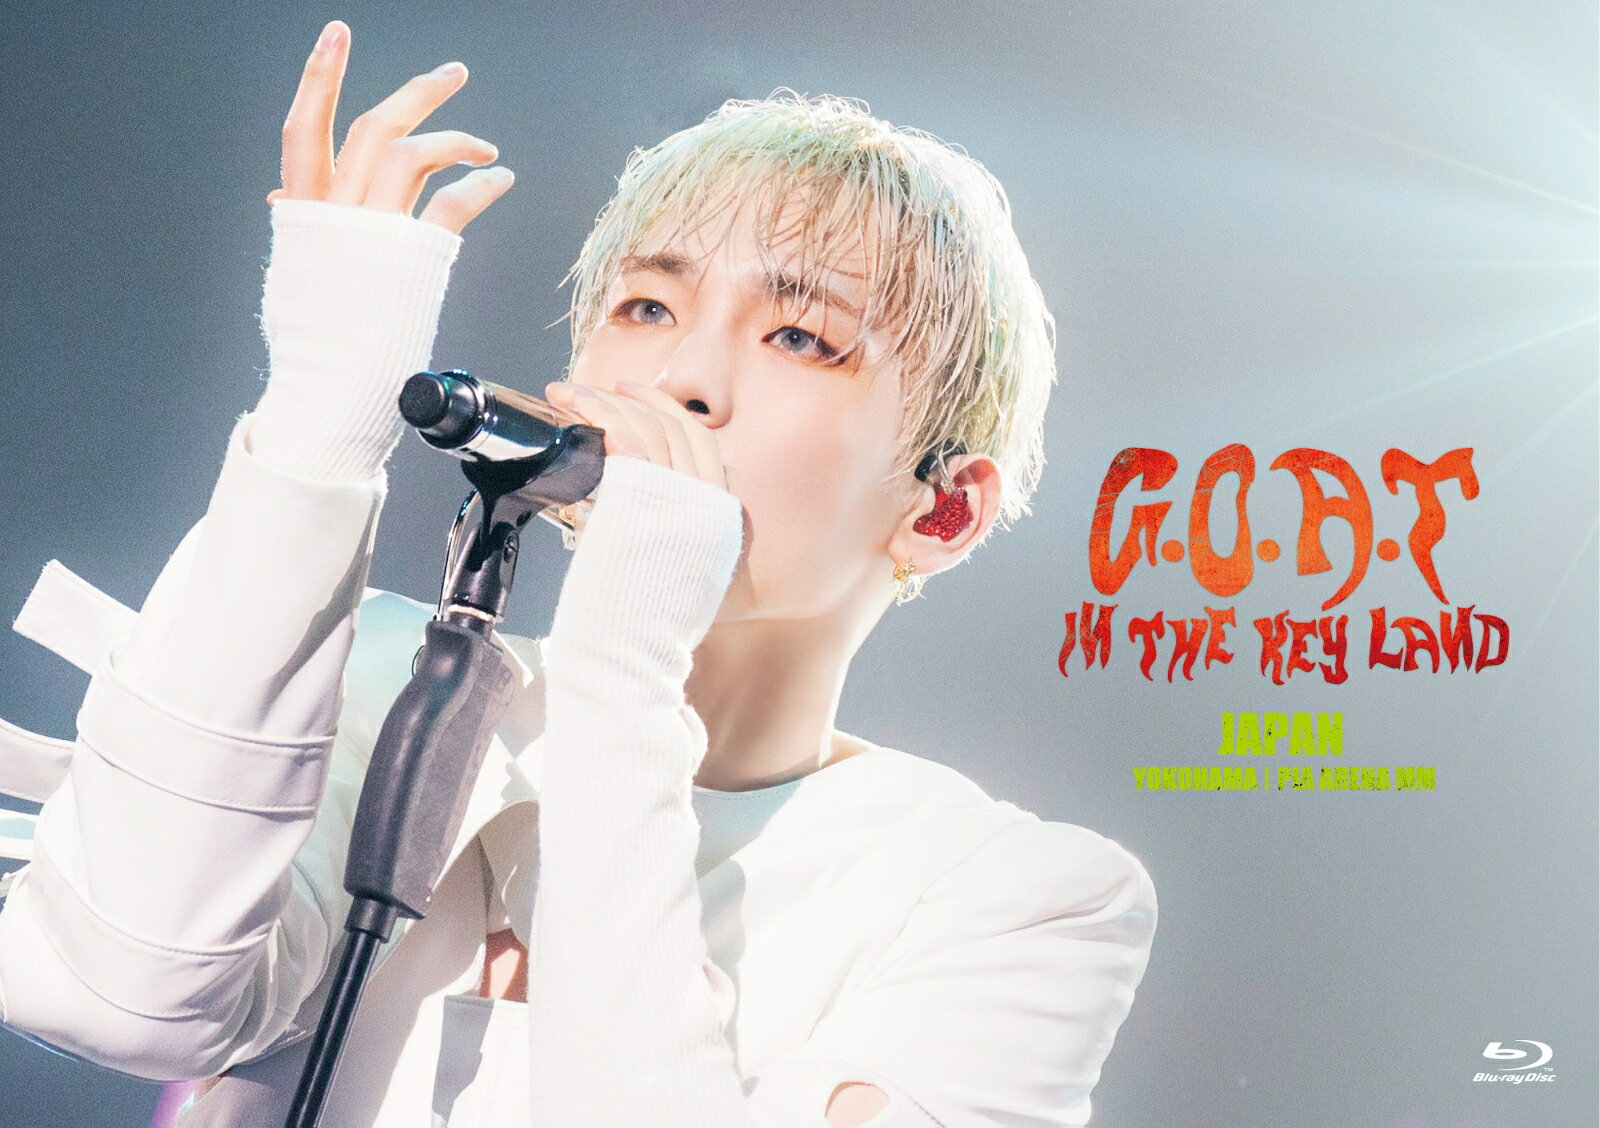 KEY CONCERT - G.O.A.T. (Greatest Of All Time) IN THE KEYLAND JAPAN【Blu-ray】